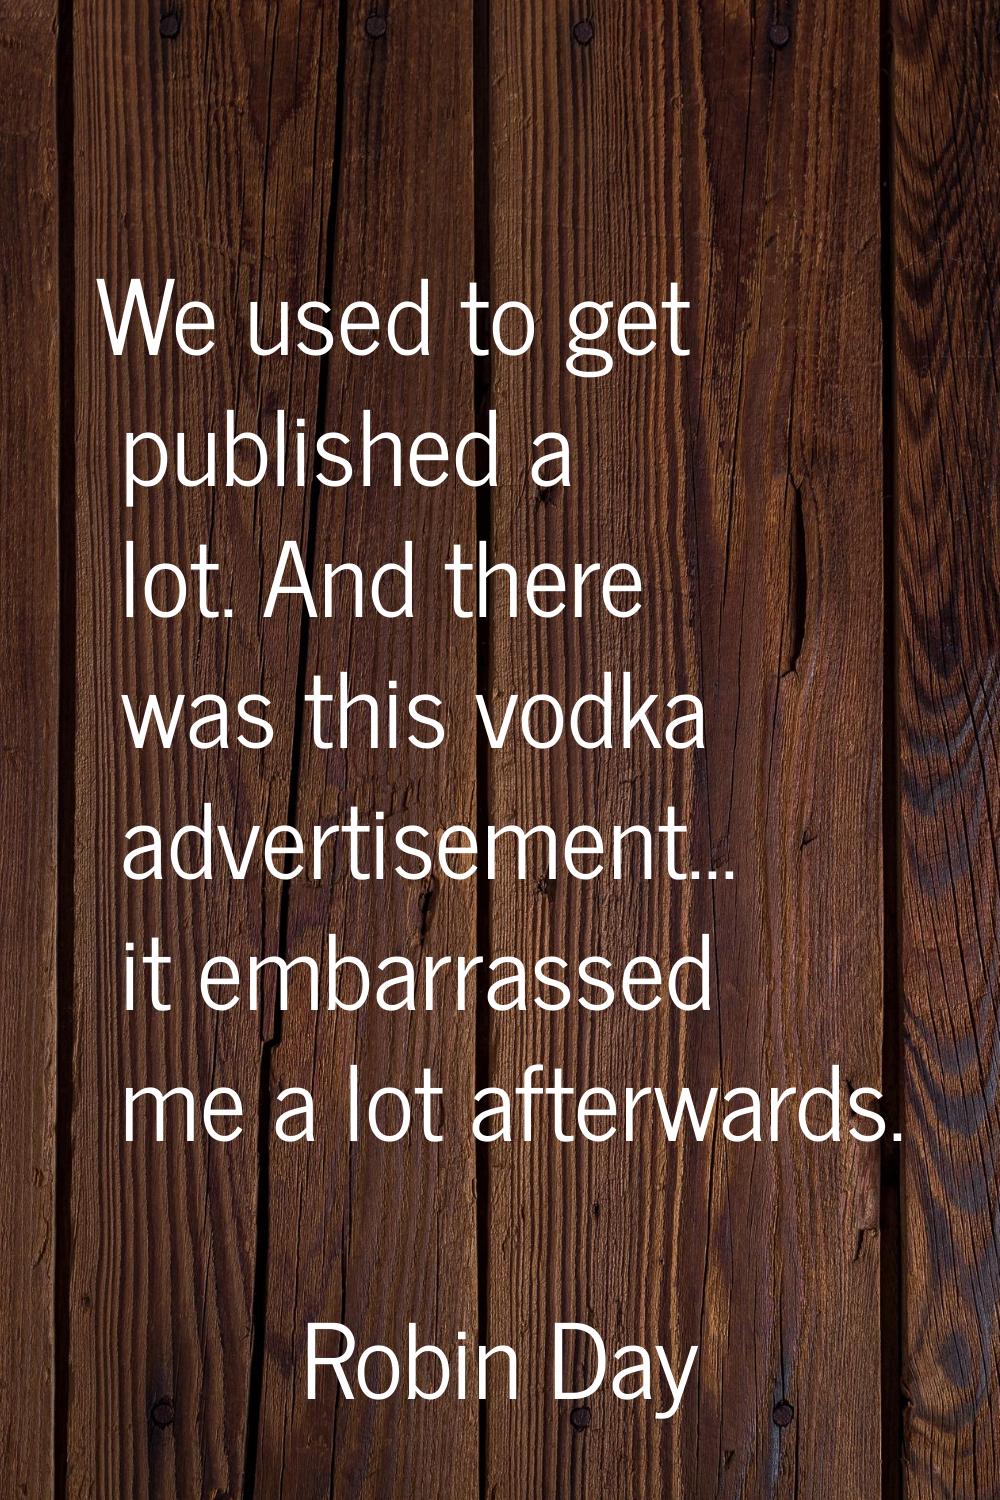 We used to get published a lot. And there was this vodka advertisement... it embarrassed me a lot a